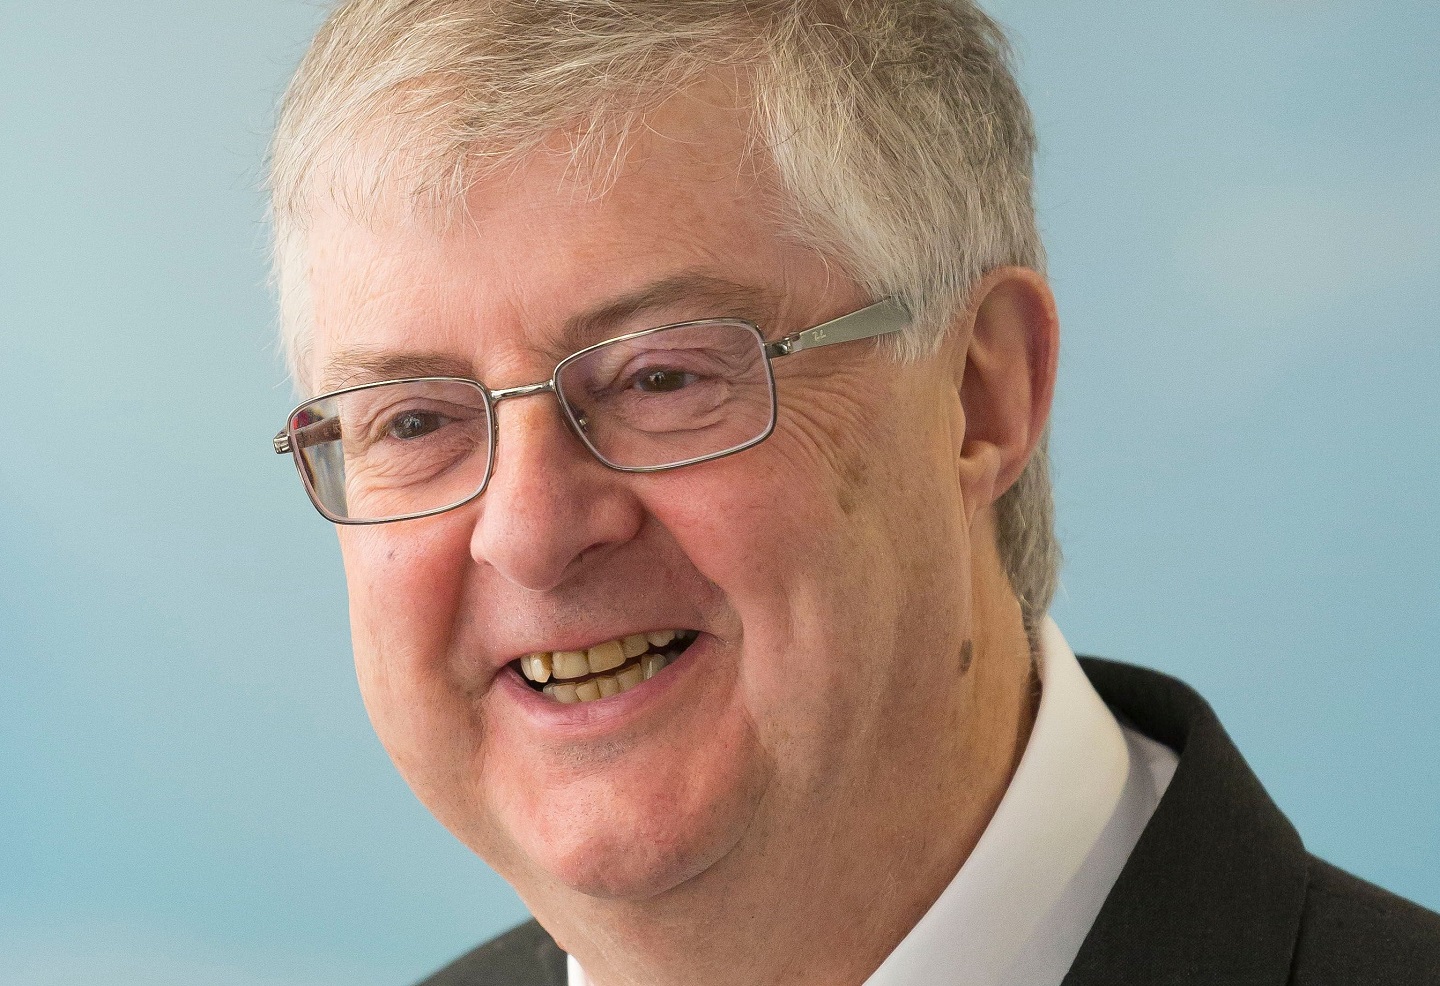 Wales’ First Minister, Mark Drakeford AM